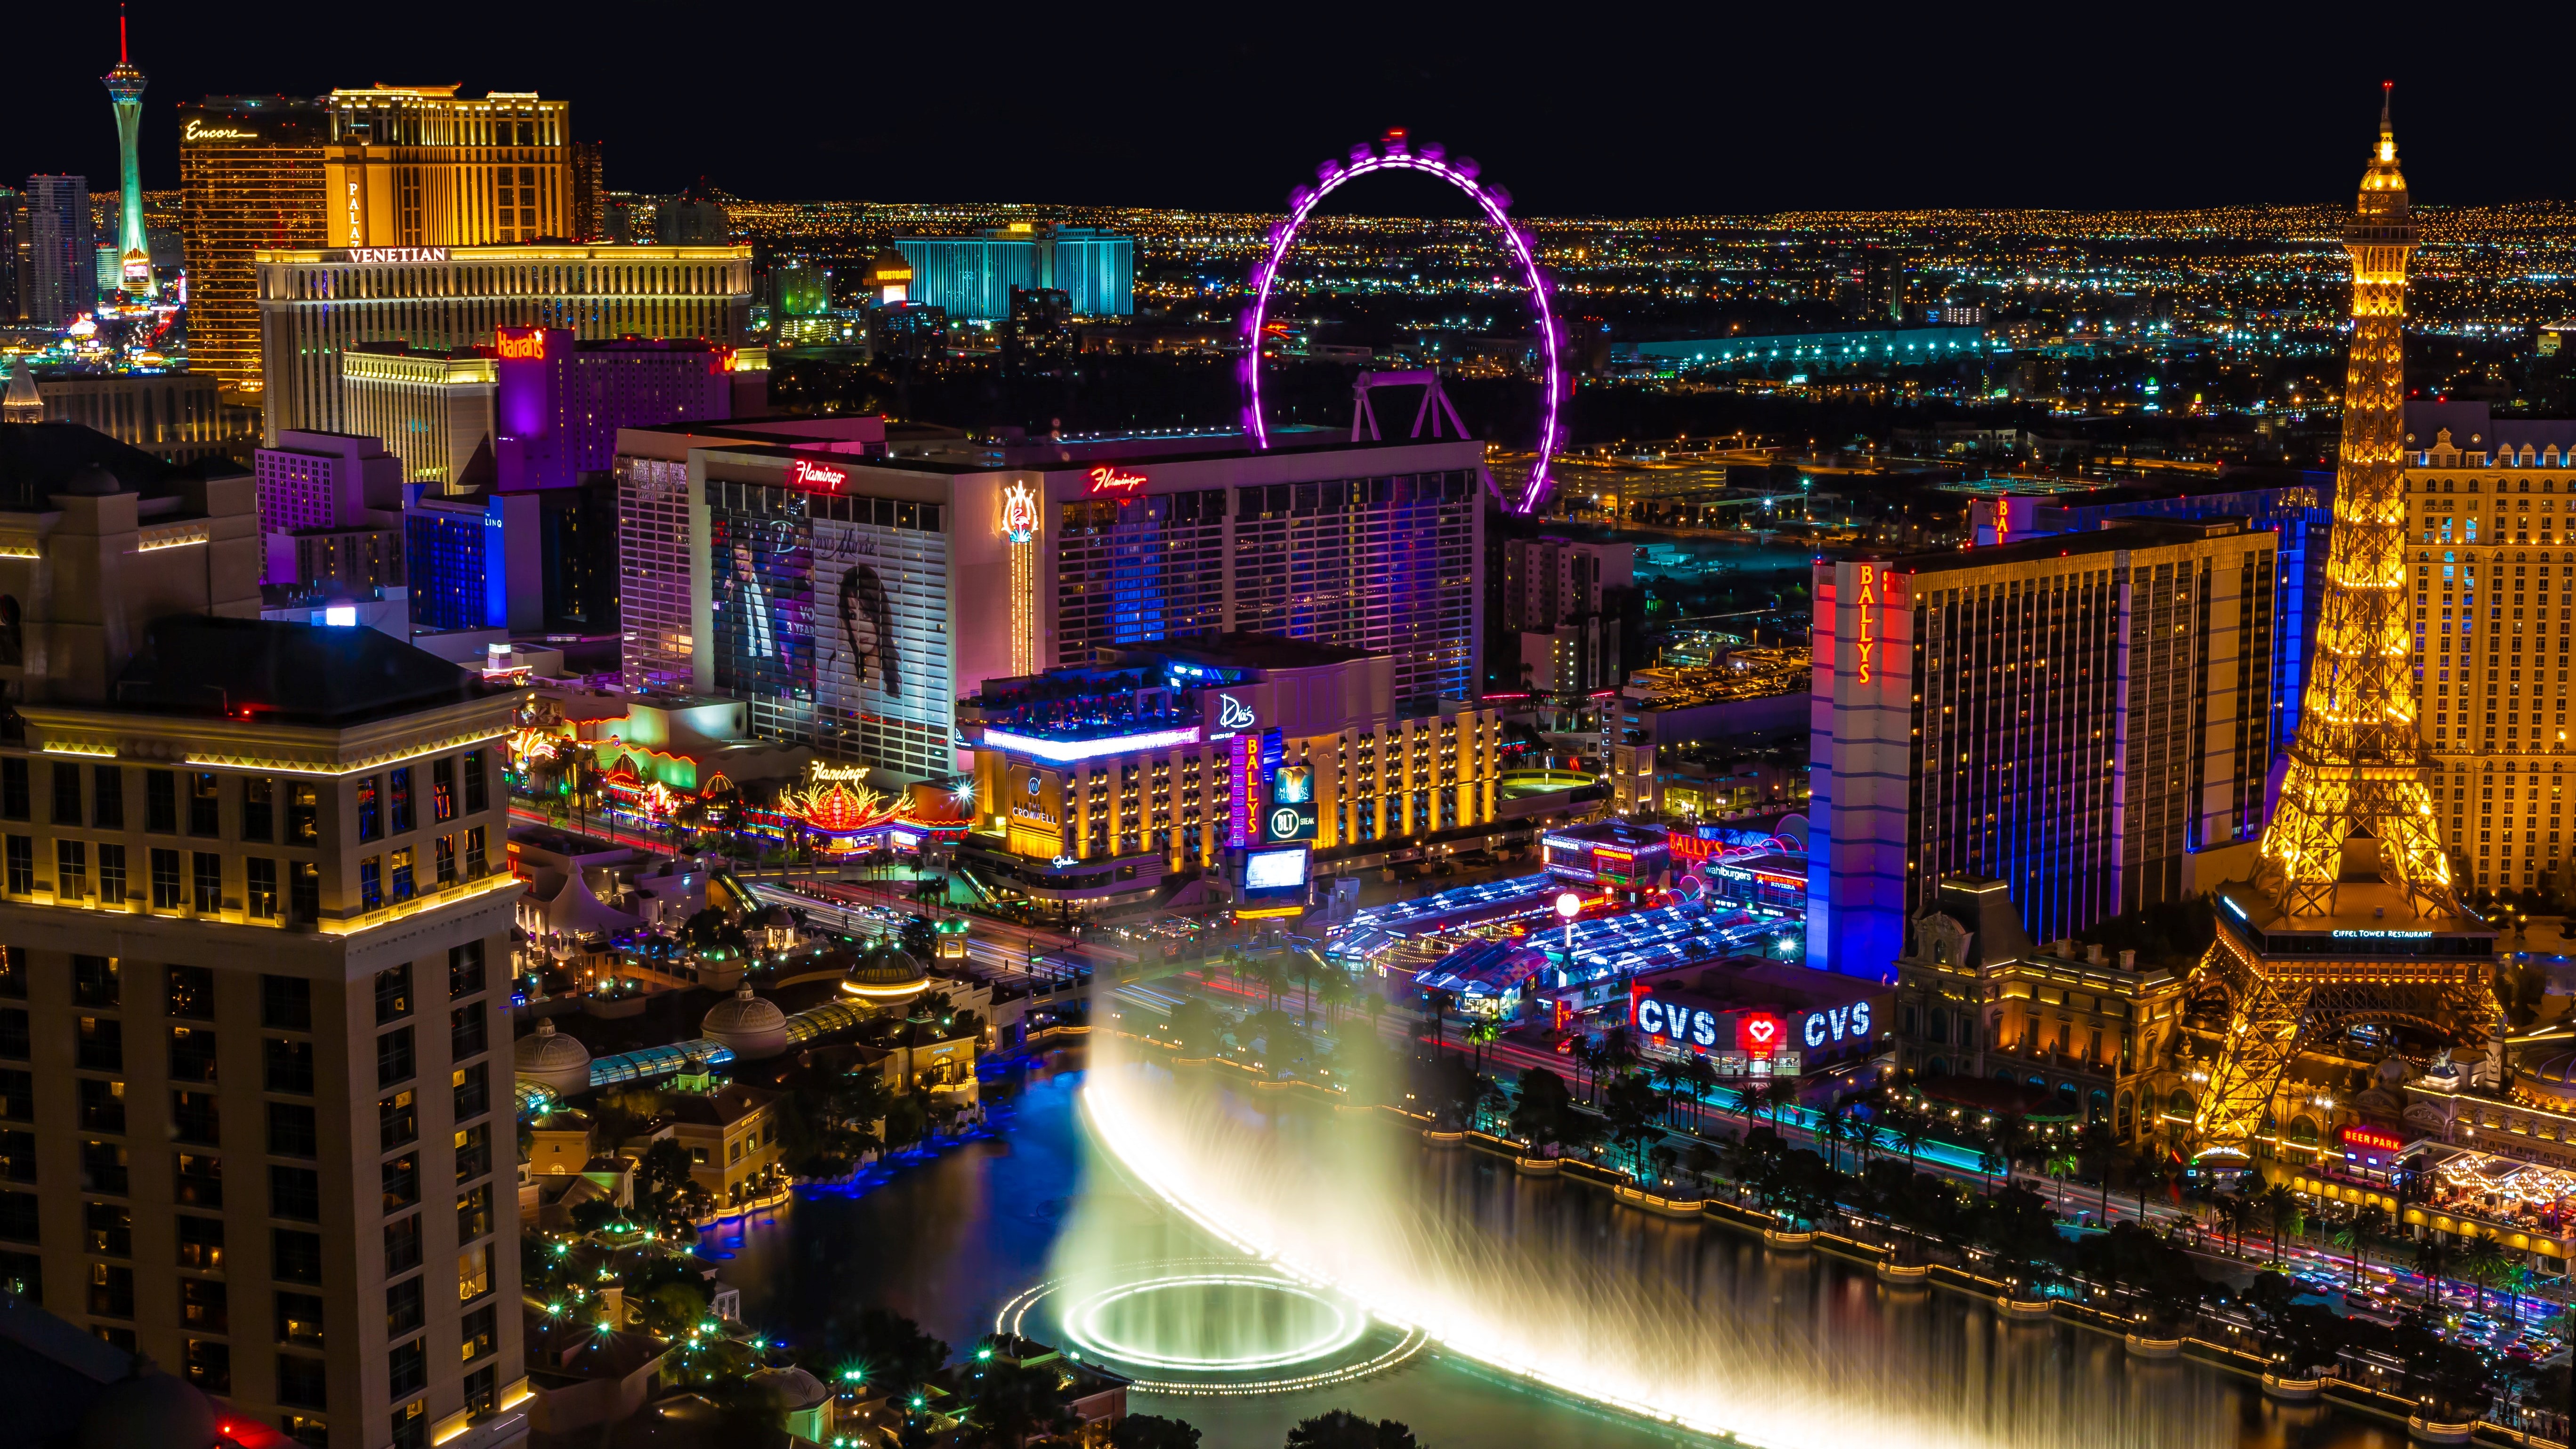 How to Book a Las Vegas Hotel